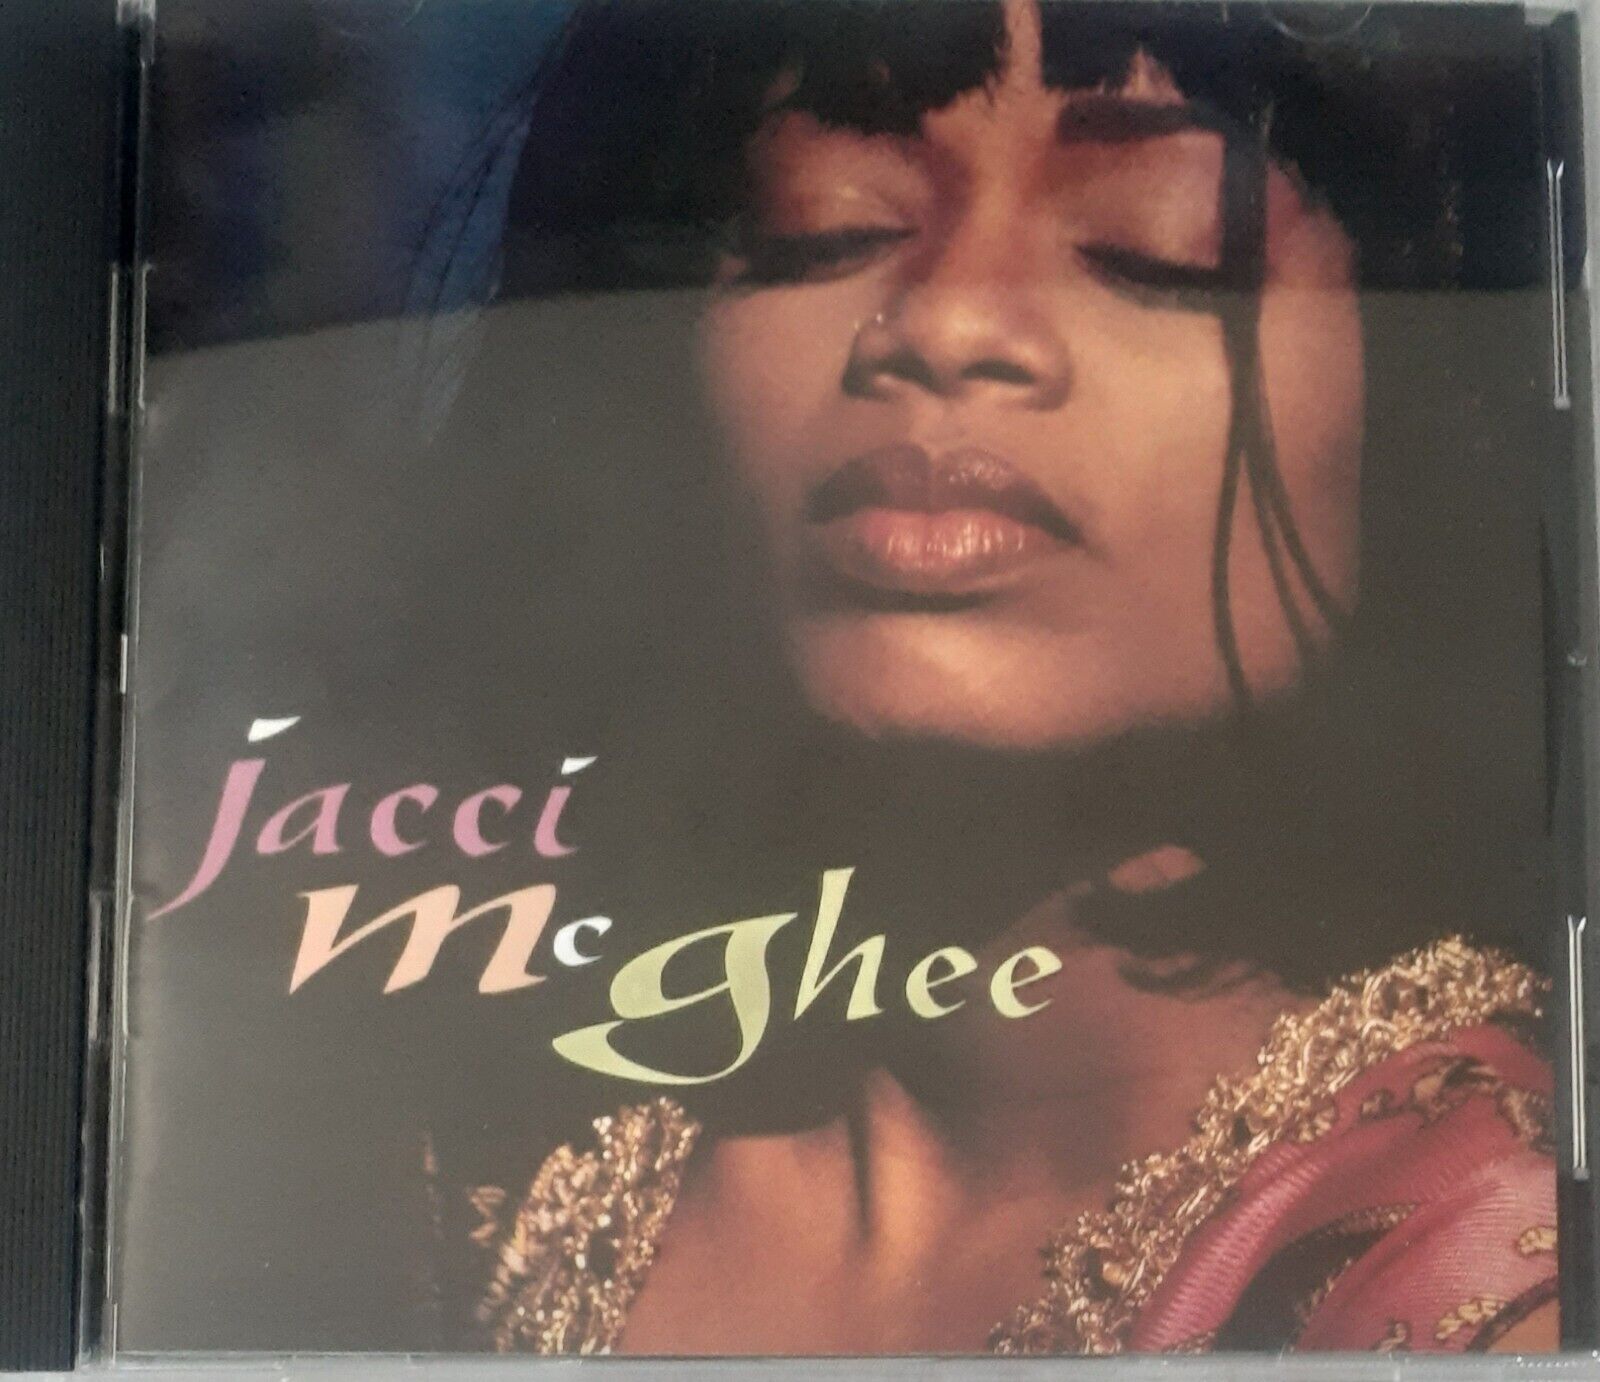 Jacci McGhee Self Titled CD 1992 MCA  MCAD-10291 Excellent Tested